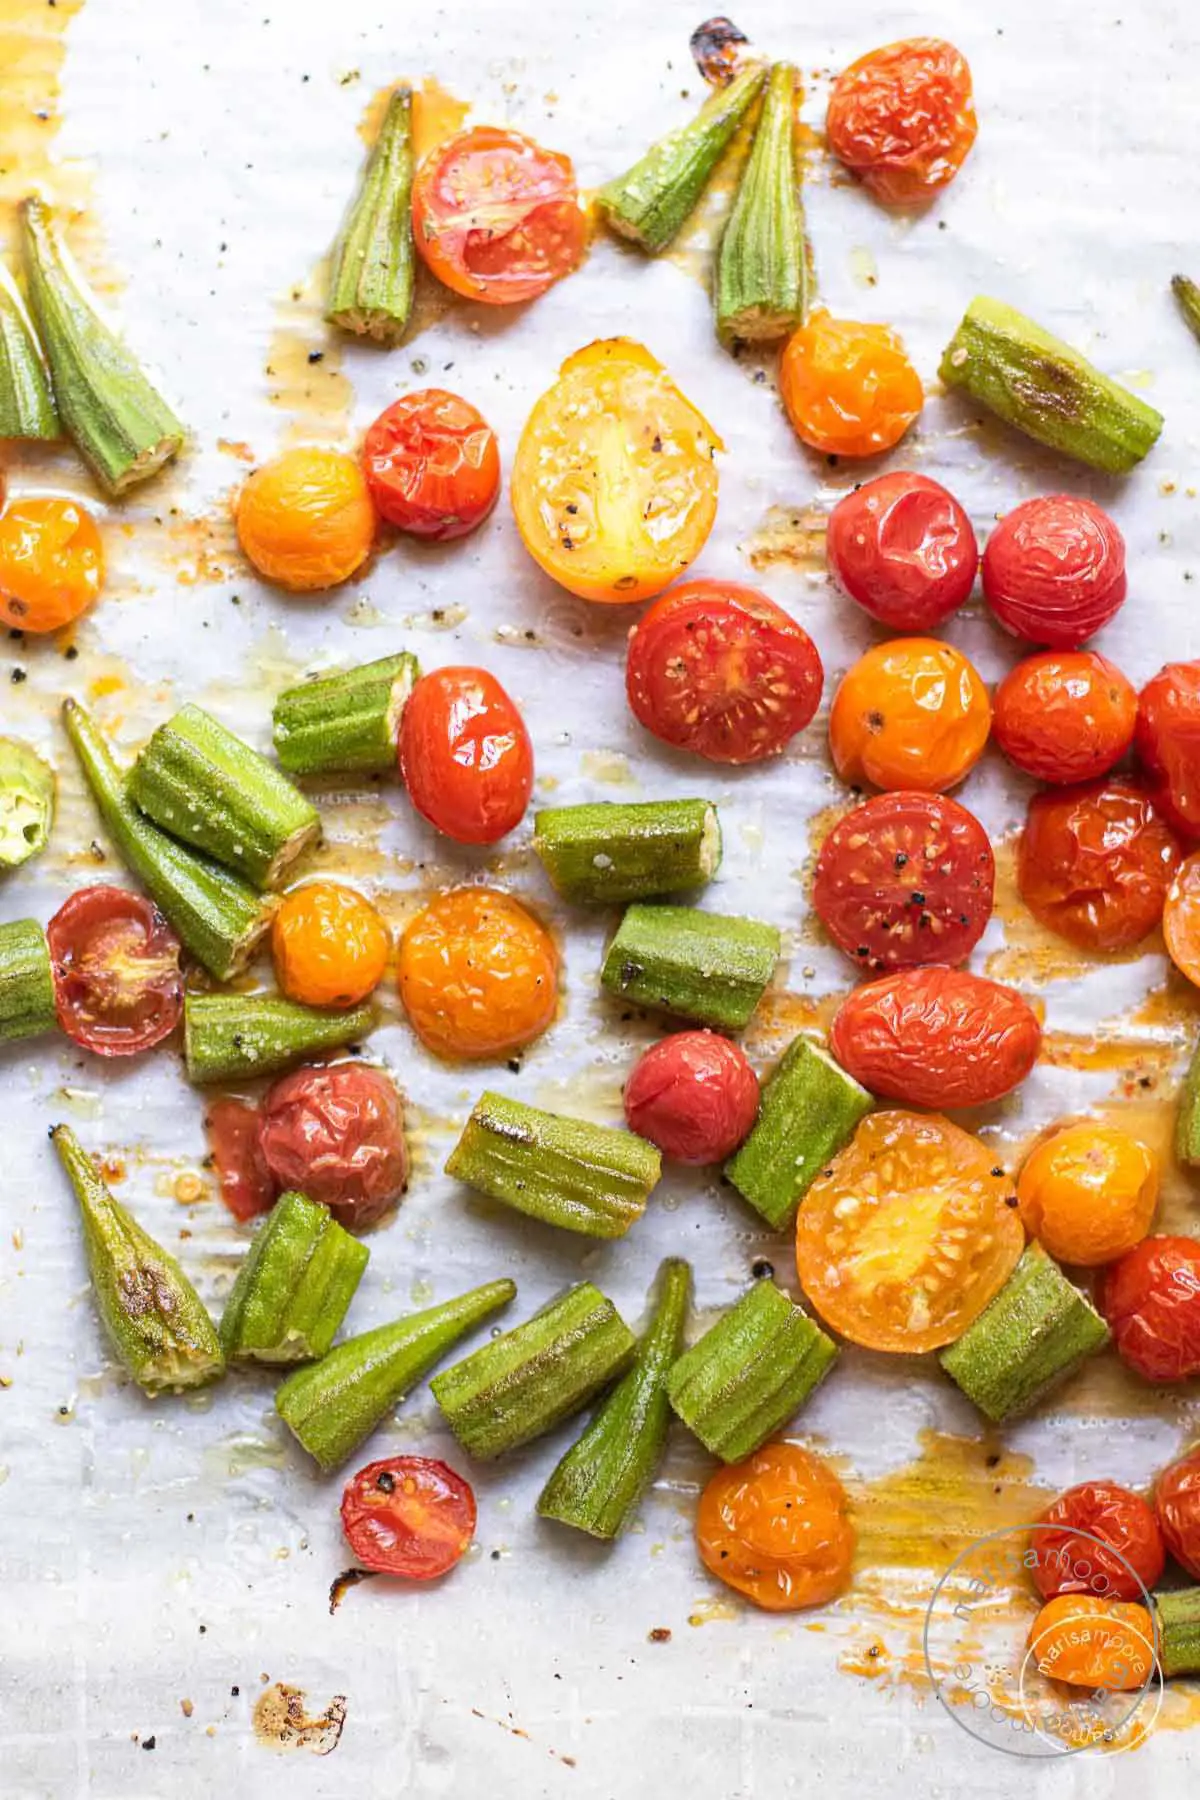 Grilled okra and tomatoes can be added as condiments to other recipes as well